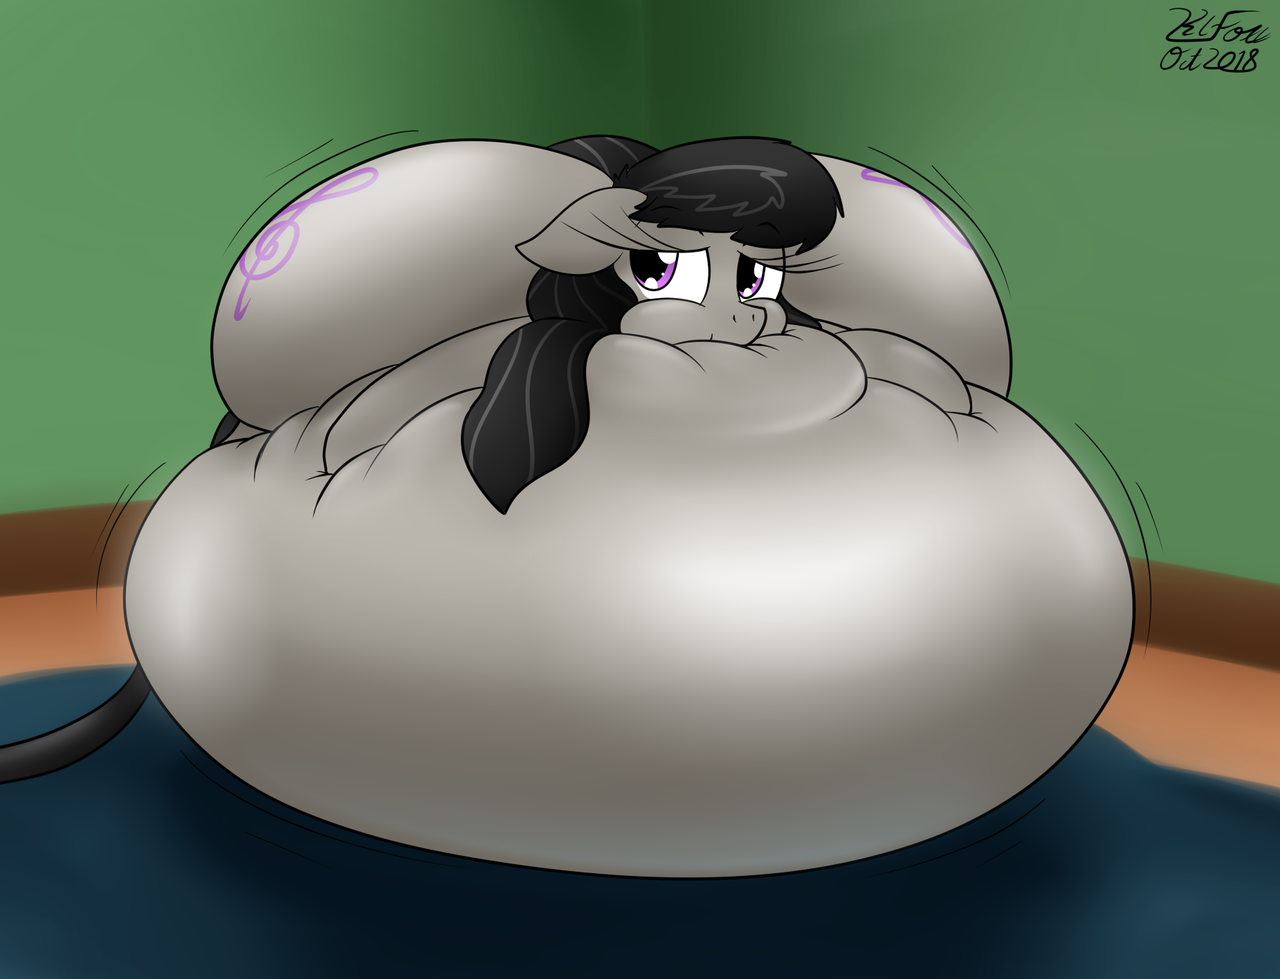 impossibly large belly, inflatia, inflation, large butt, puffy cheeks, squi...